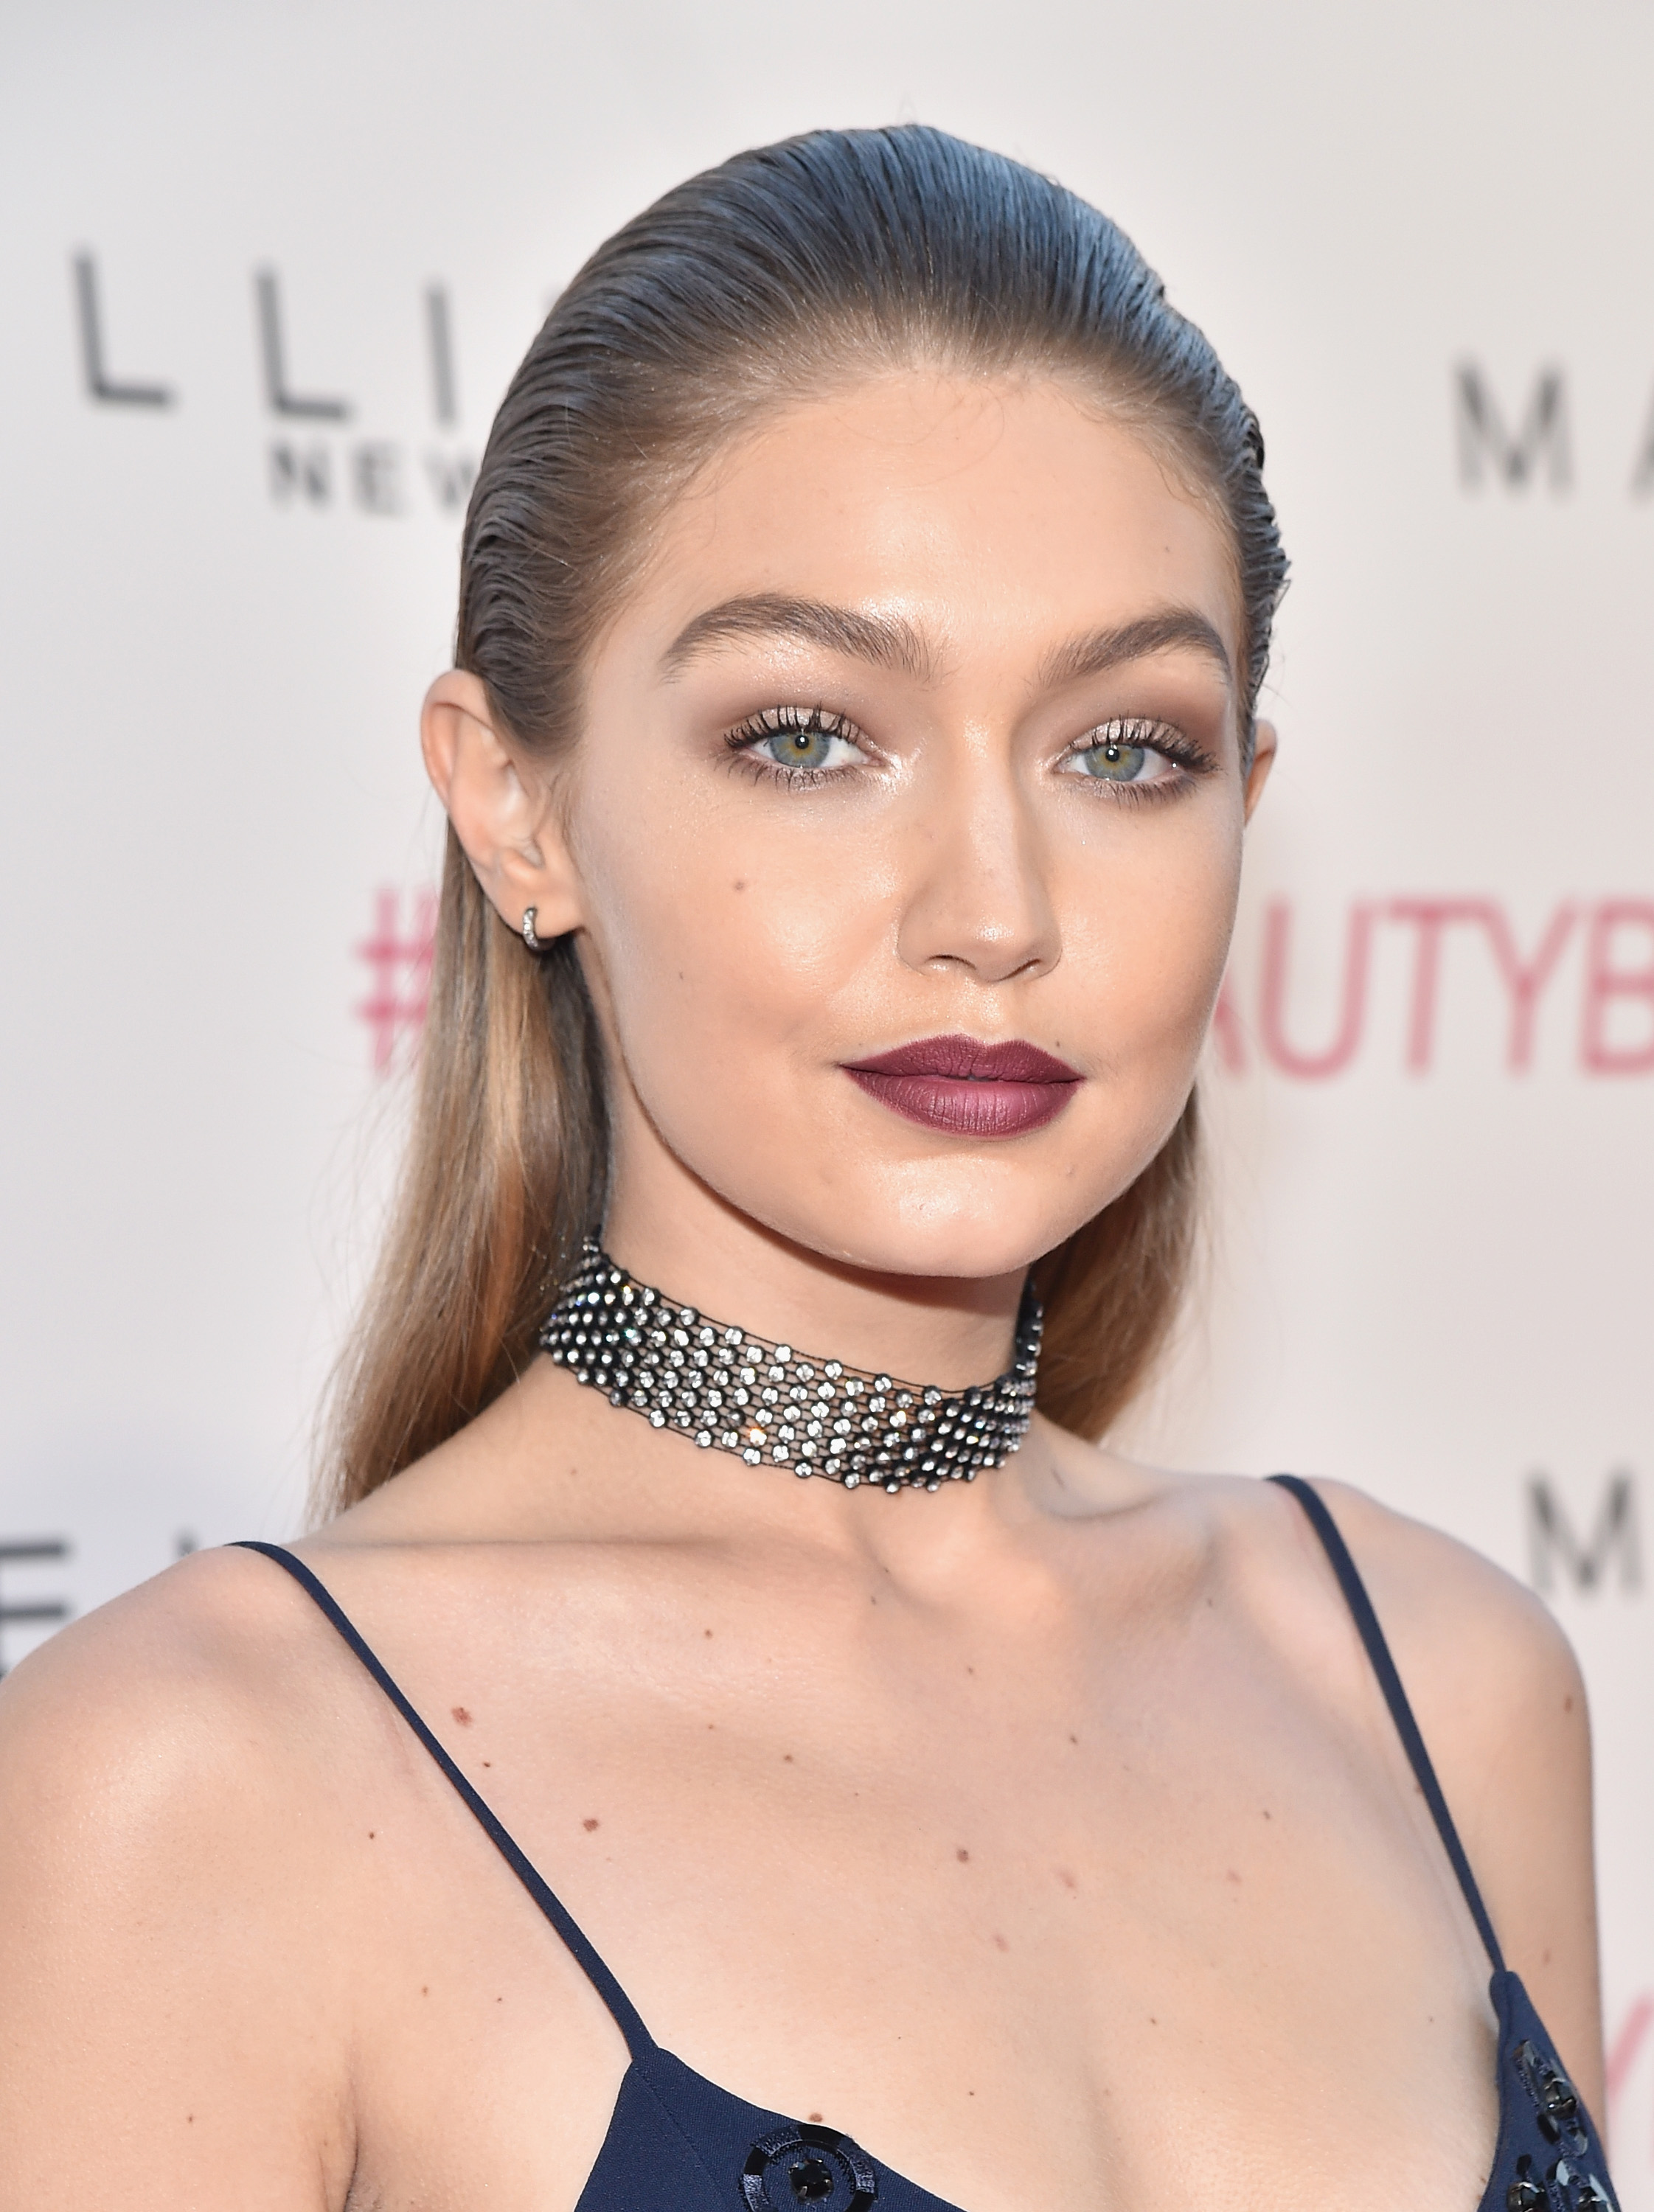 9 Fall 2016 Lipstick Trends That Are Going To Be Hot According To Celebrity Makeup Artists